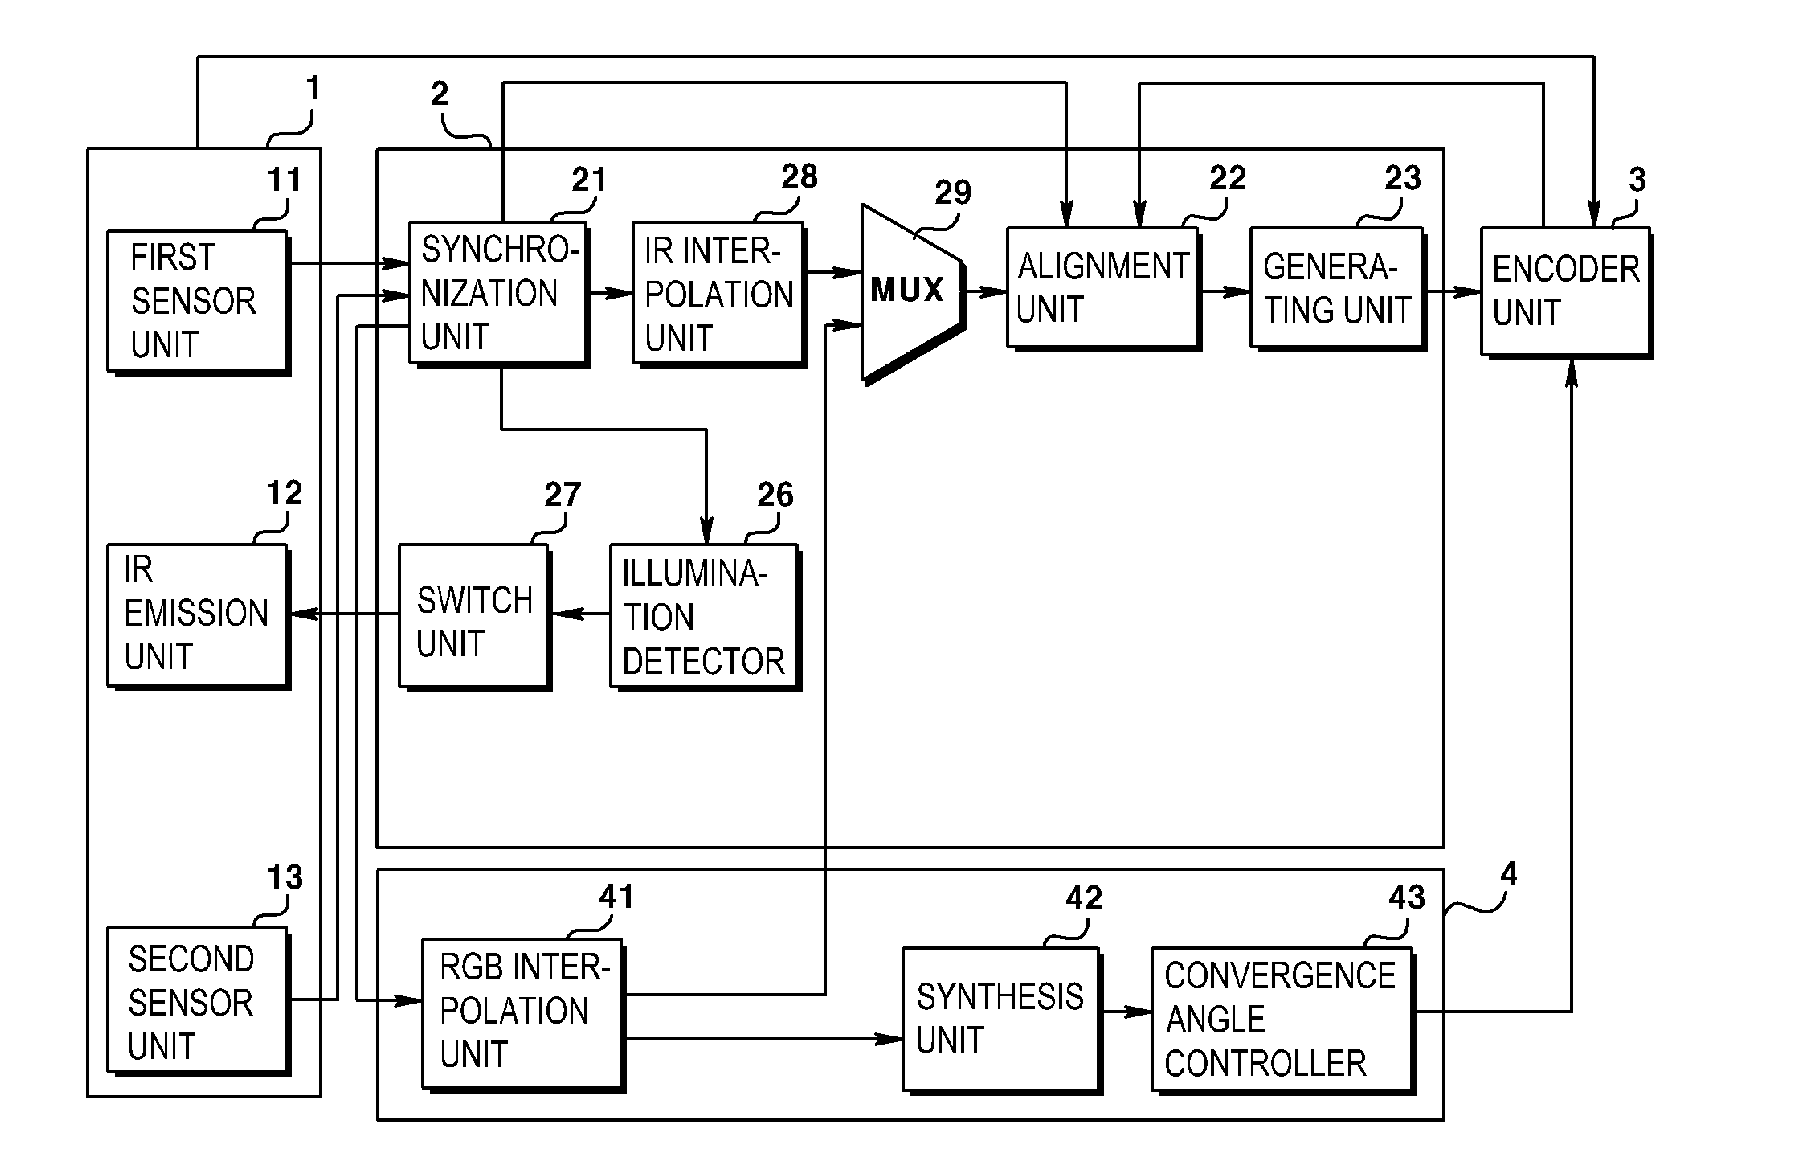 Image Processing System